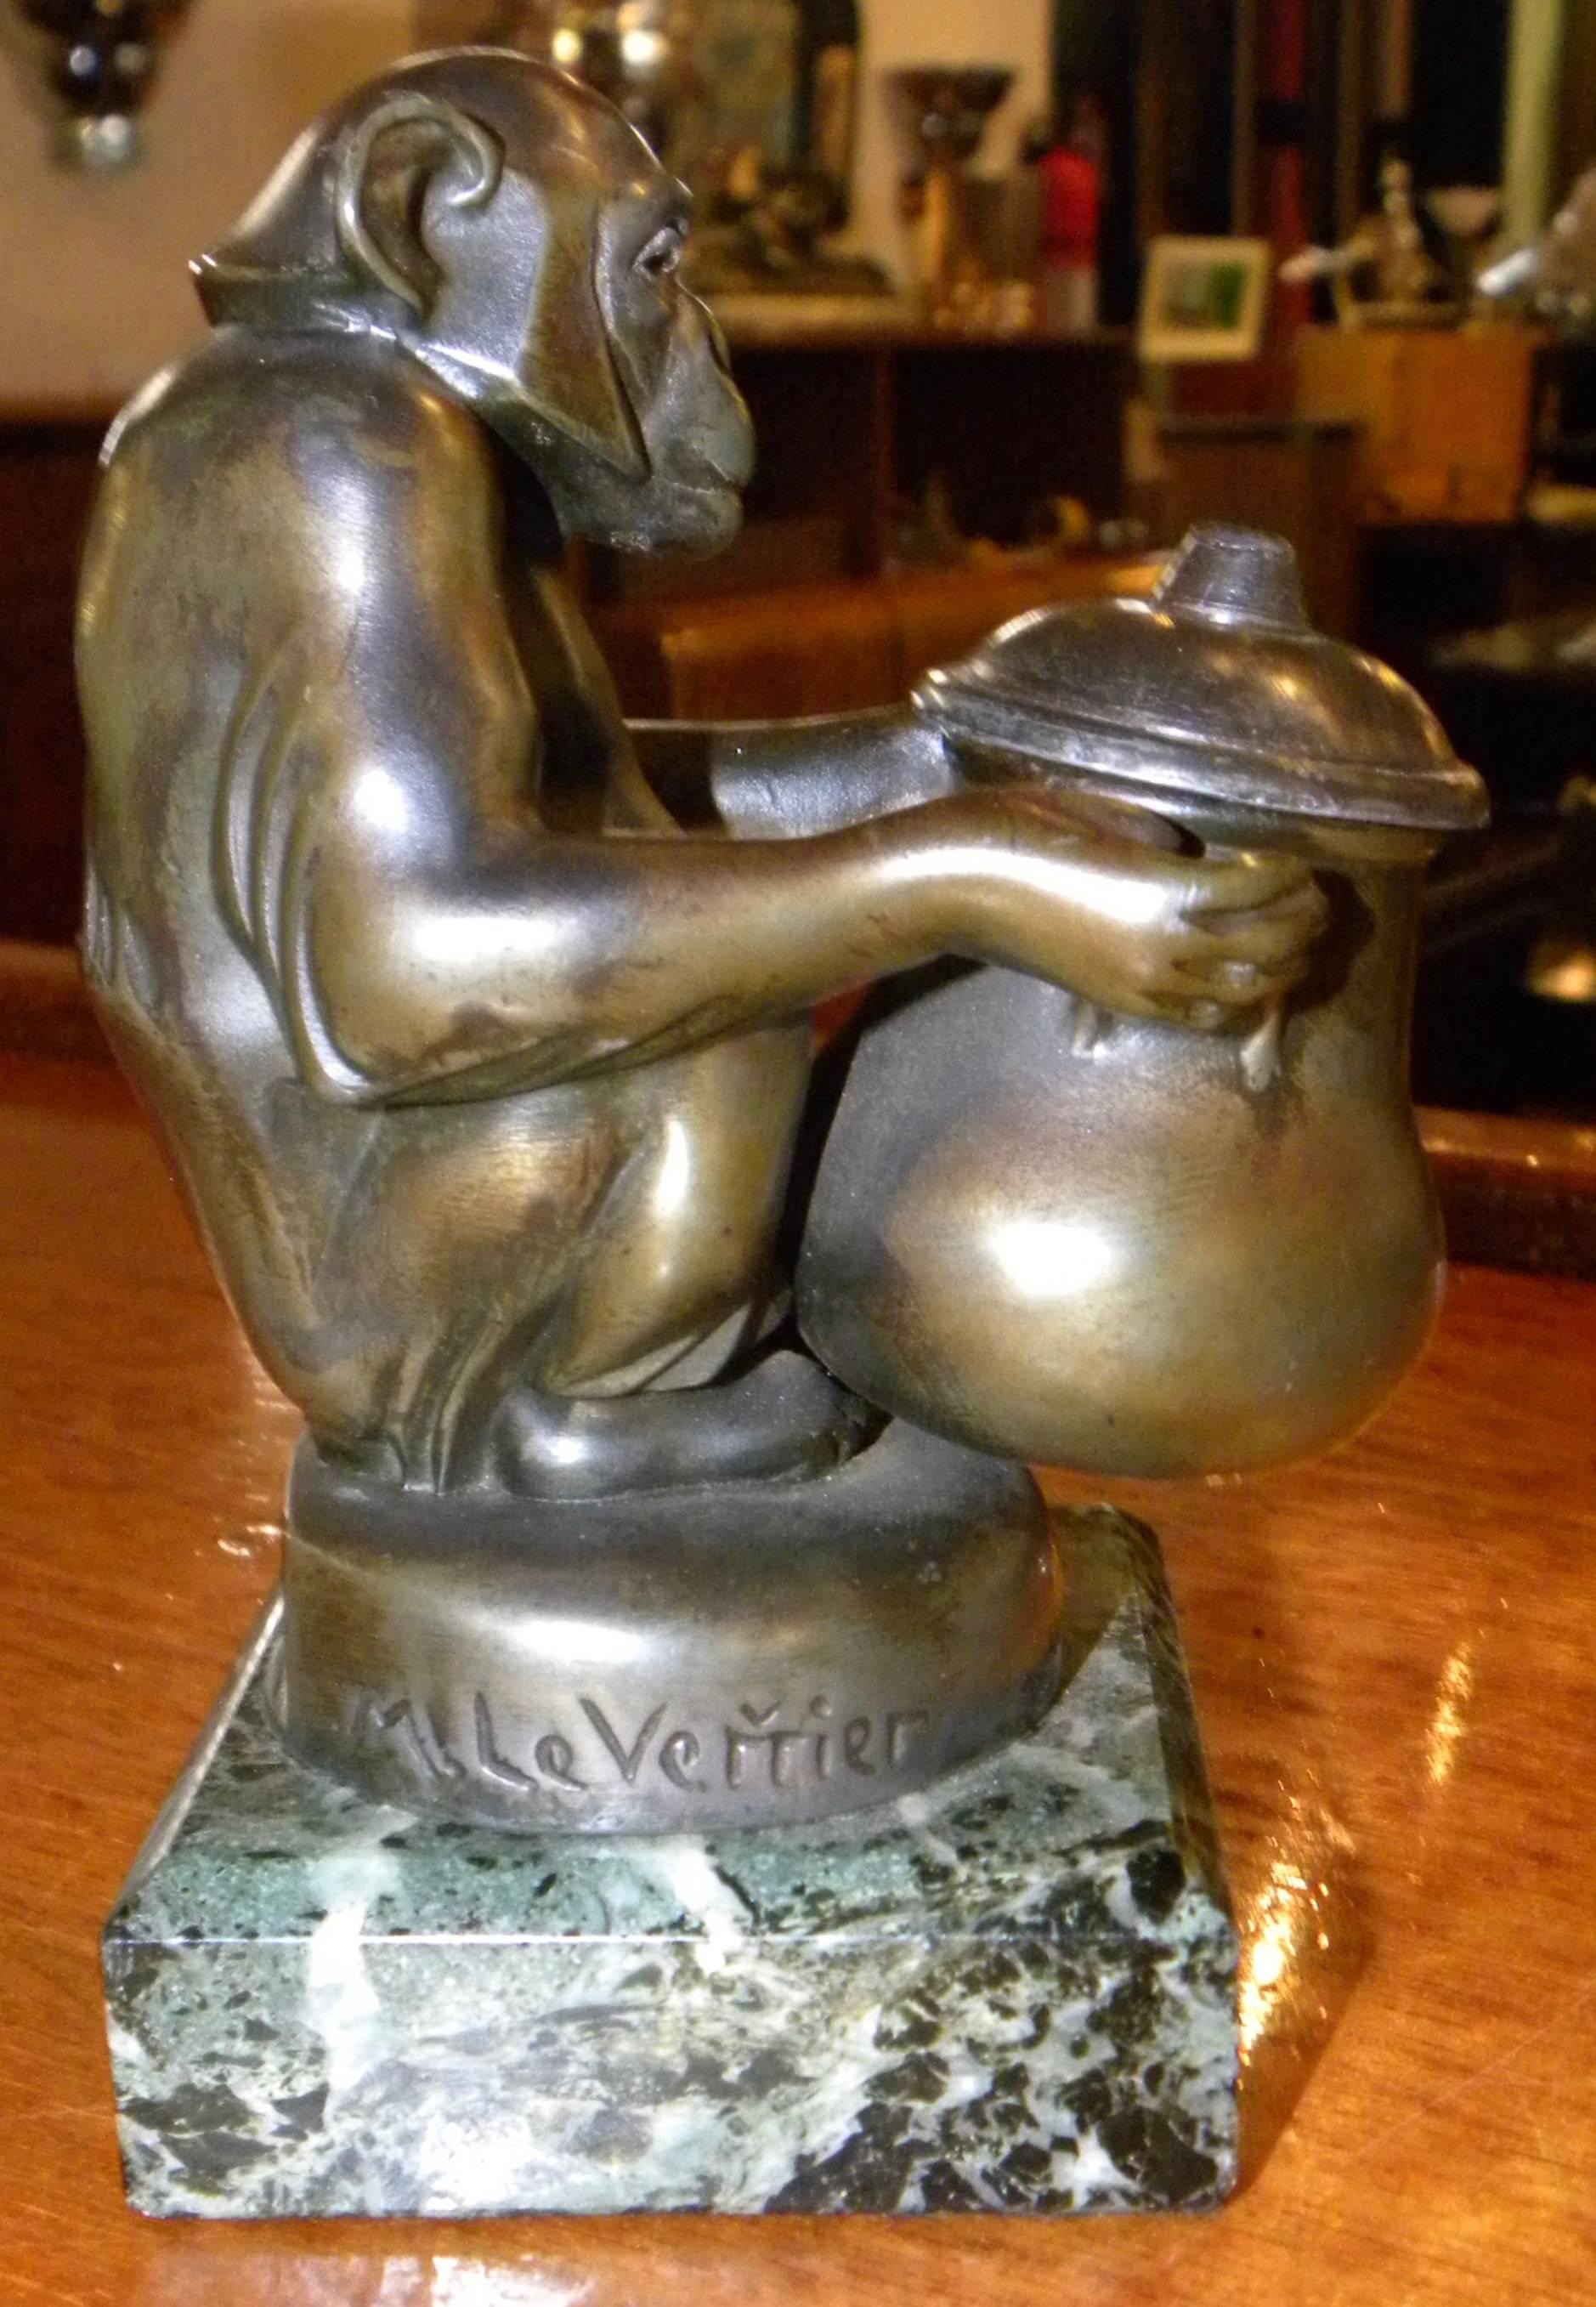 This Deco figurine of a monkey holding an inkwell is amusing and whimsical, but it also happens to be a creation of one of the most iconic and important sculptors of the 1920s and 1930s, Max Le Verrier.

“Bou Bou” the monkey appears in a few